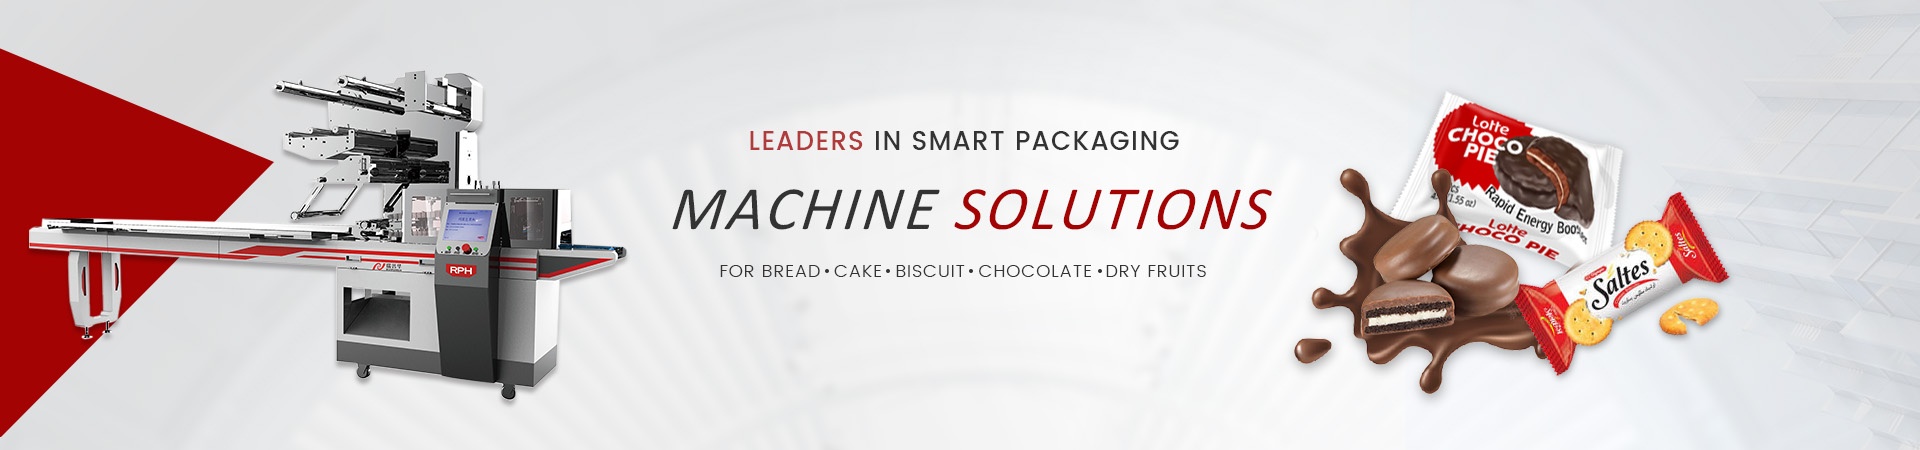 Revolutionizing Packaging: The Latest Trends in Packaging Equipment